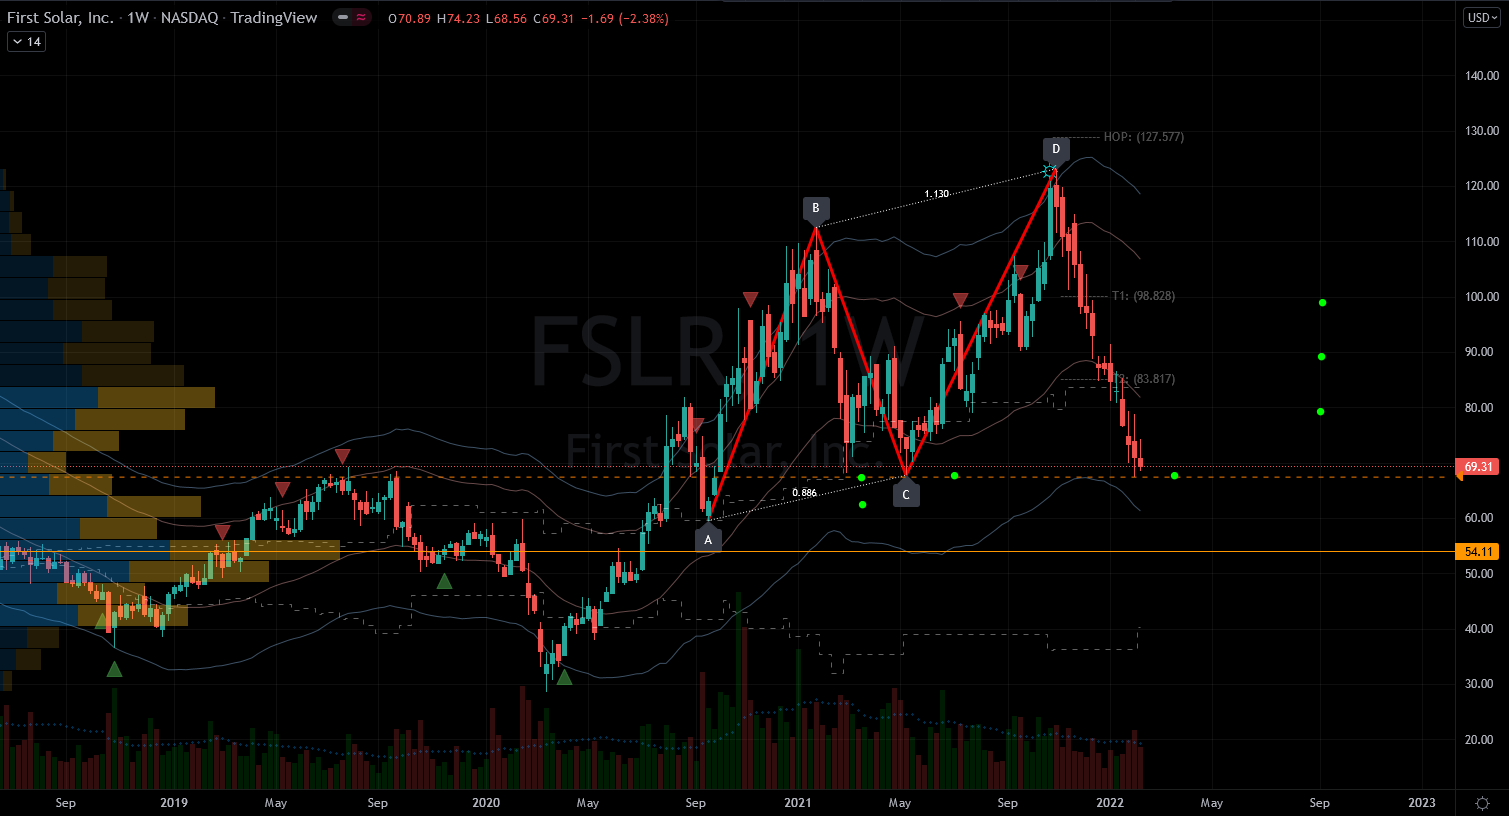 Stocks to Buy: First Solar (FSLR) Stock Chart Showing Potential Base